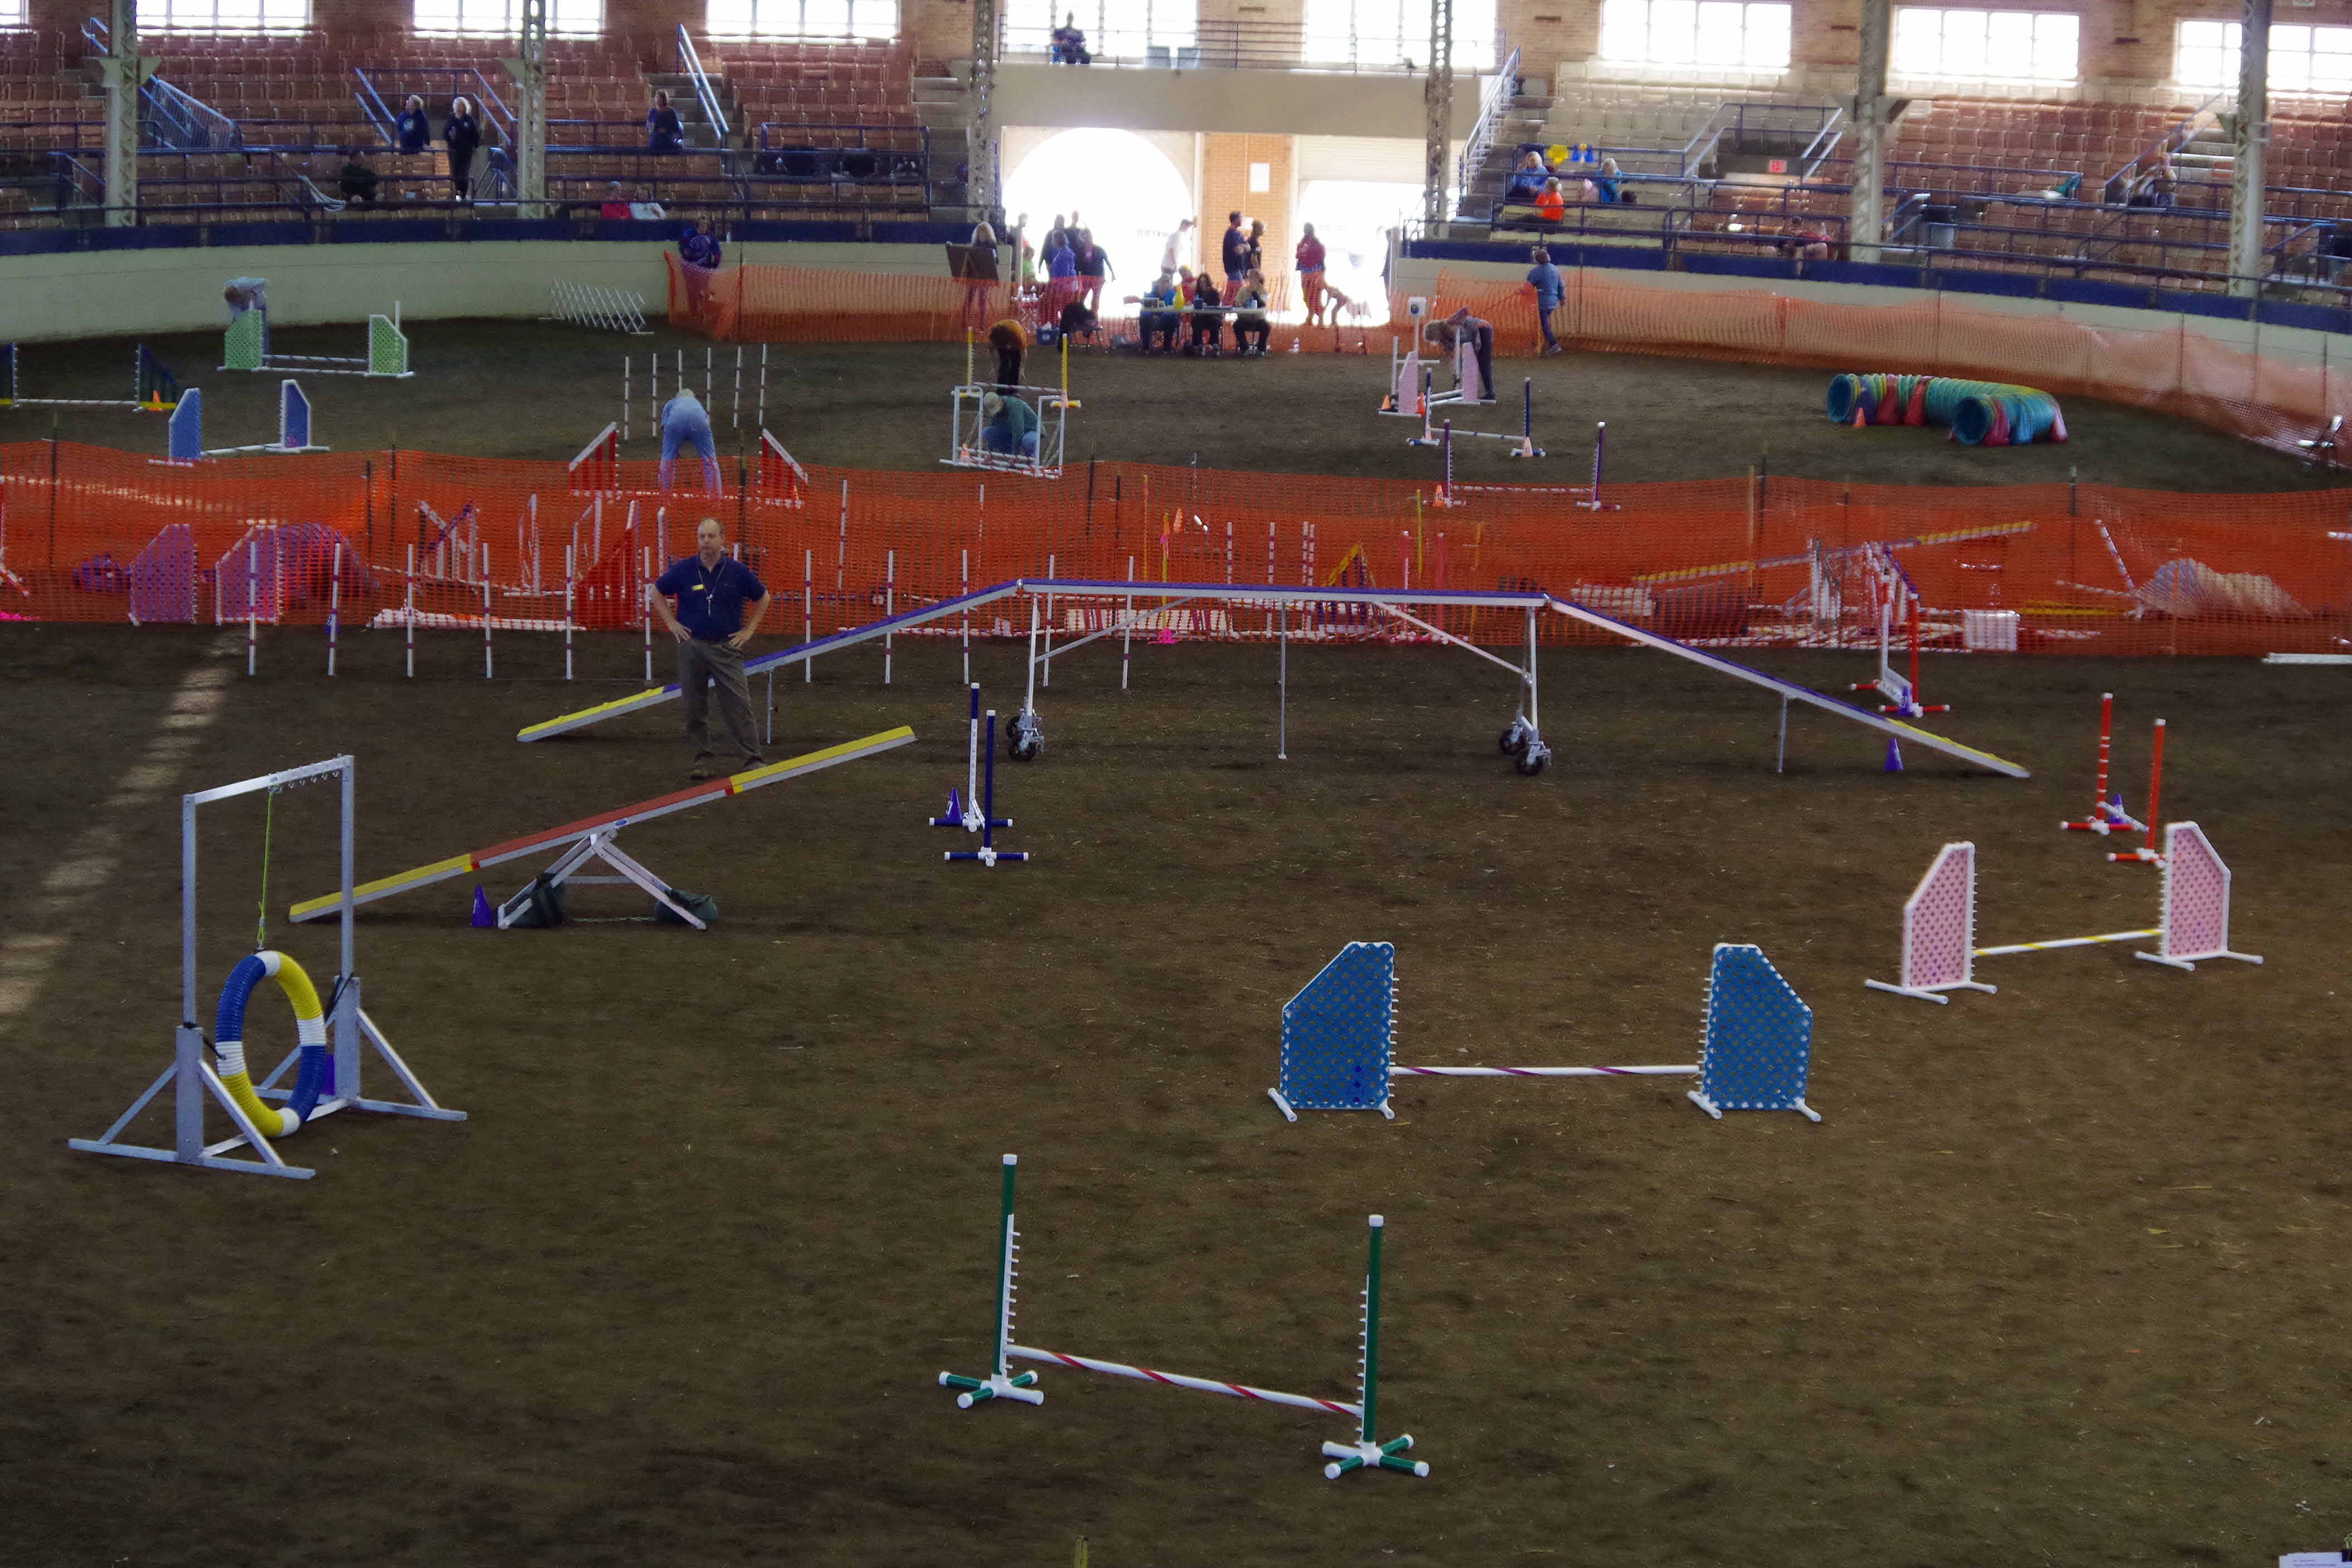 Agility Rings with dirt floors at the Coliseum of Springfield Illinois' state fairgrounds